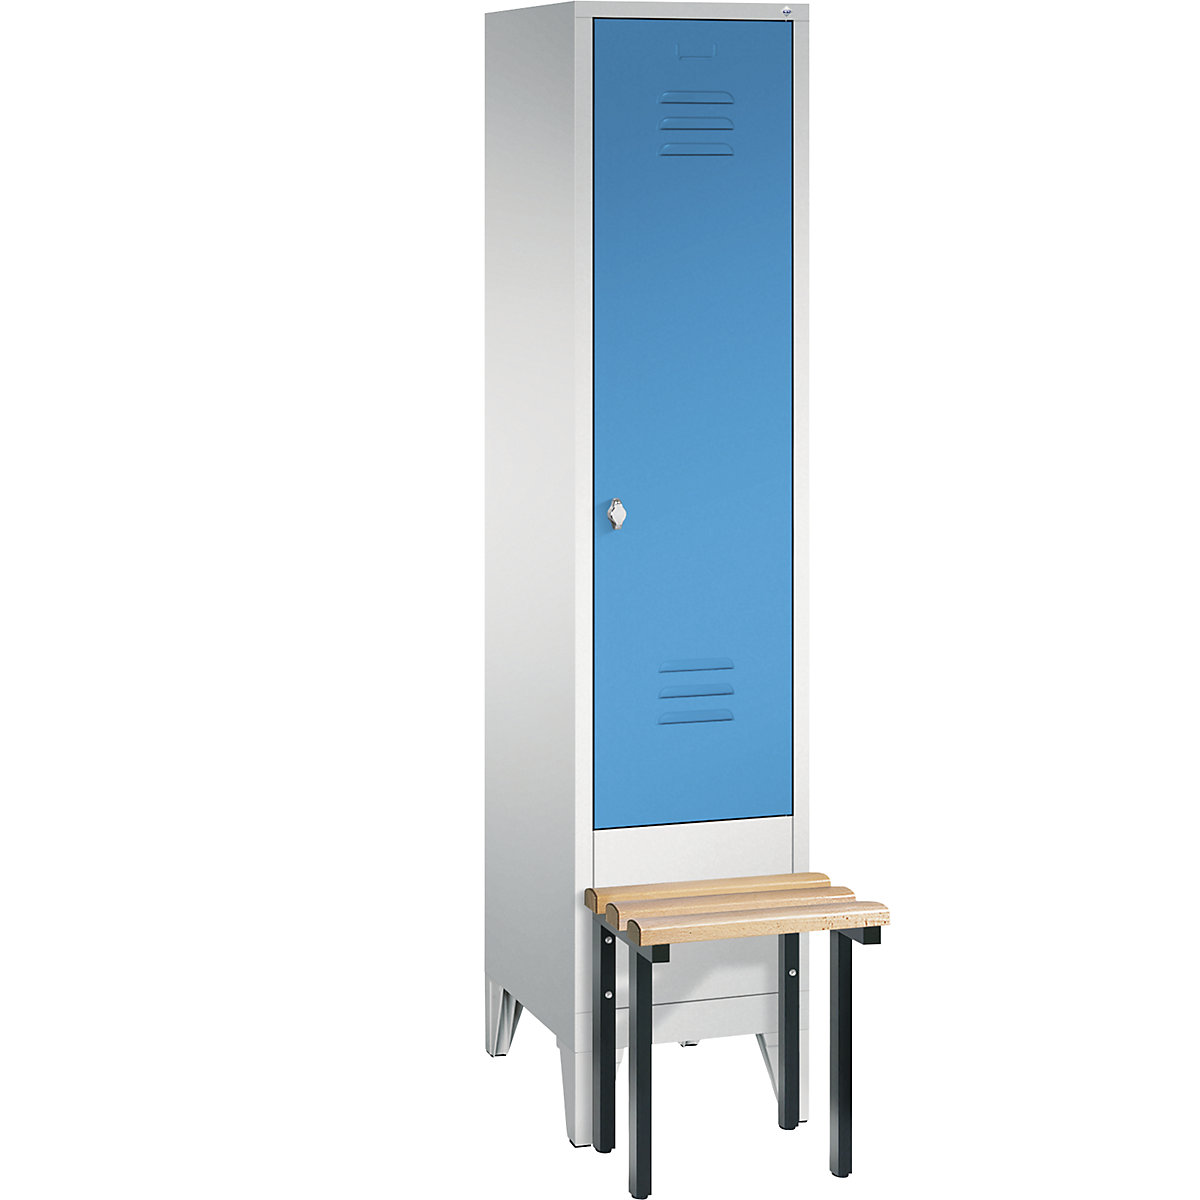 CLASSIC cloakroom locker with bench mounted in front – C+P, 1 compartment, compartment width 400 mm, light grey / light blue-12